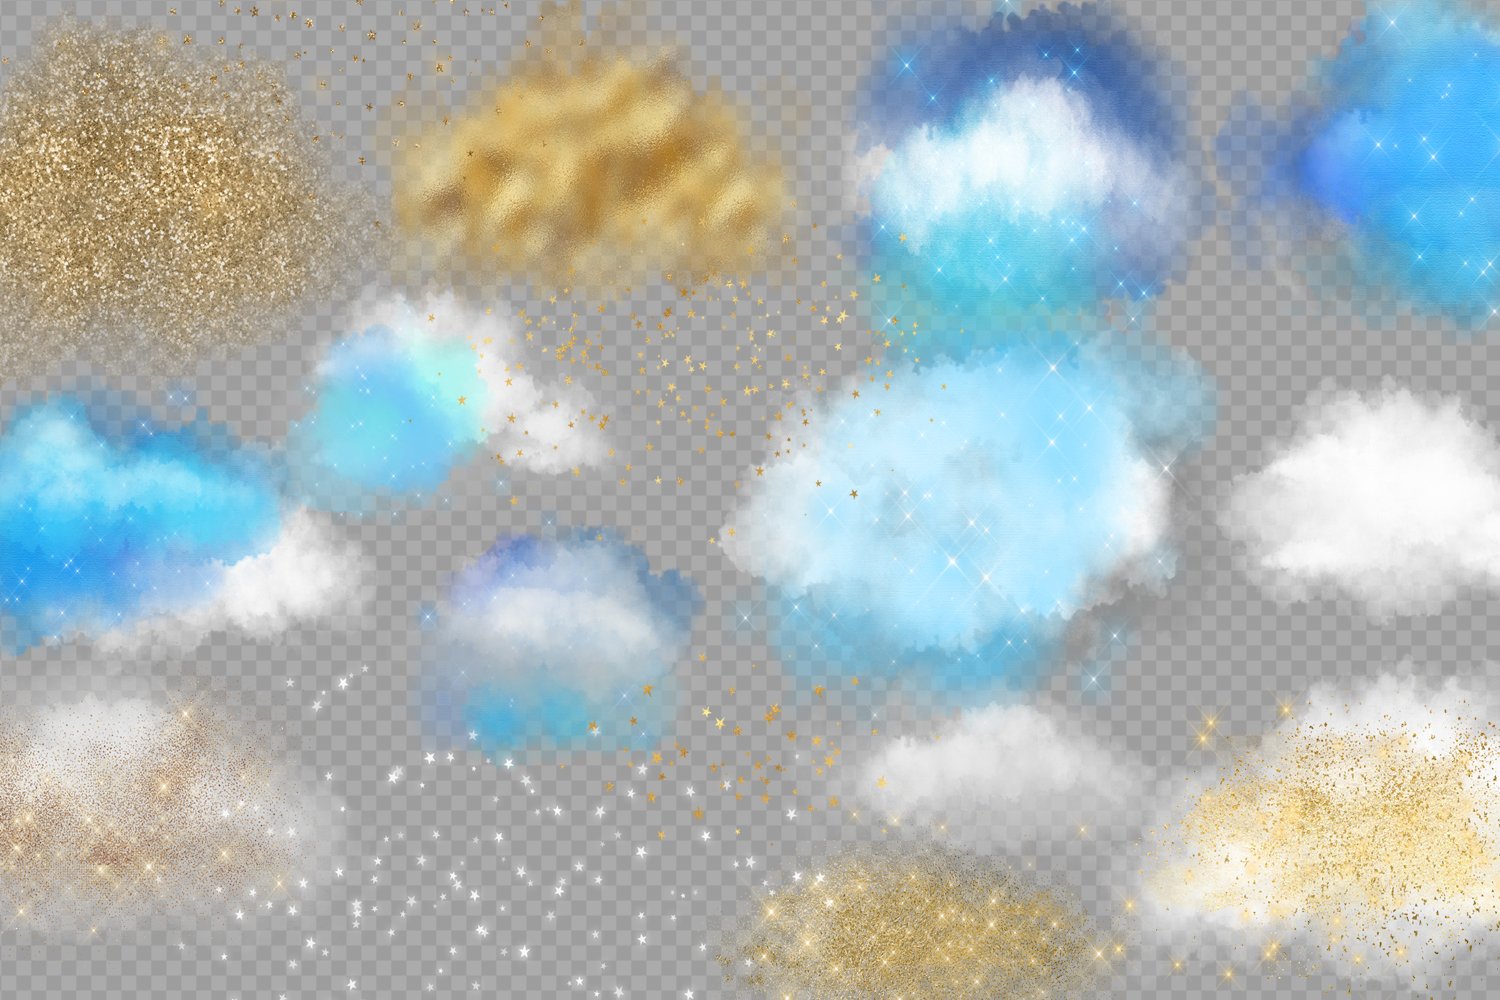 clouds and stars overlays preview 3 801